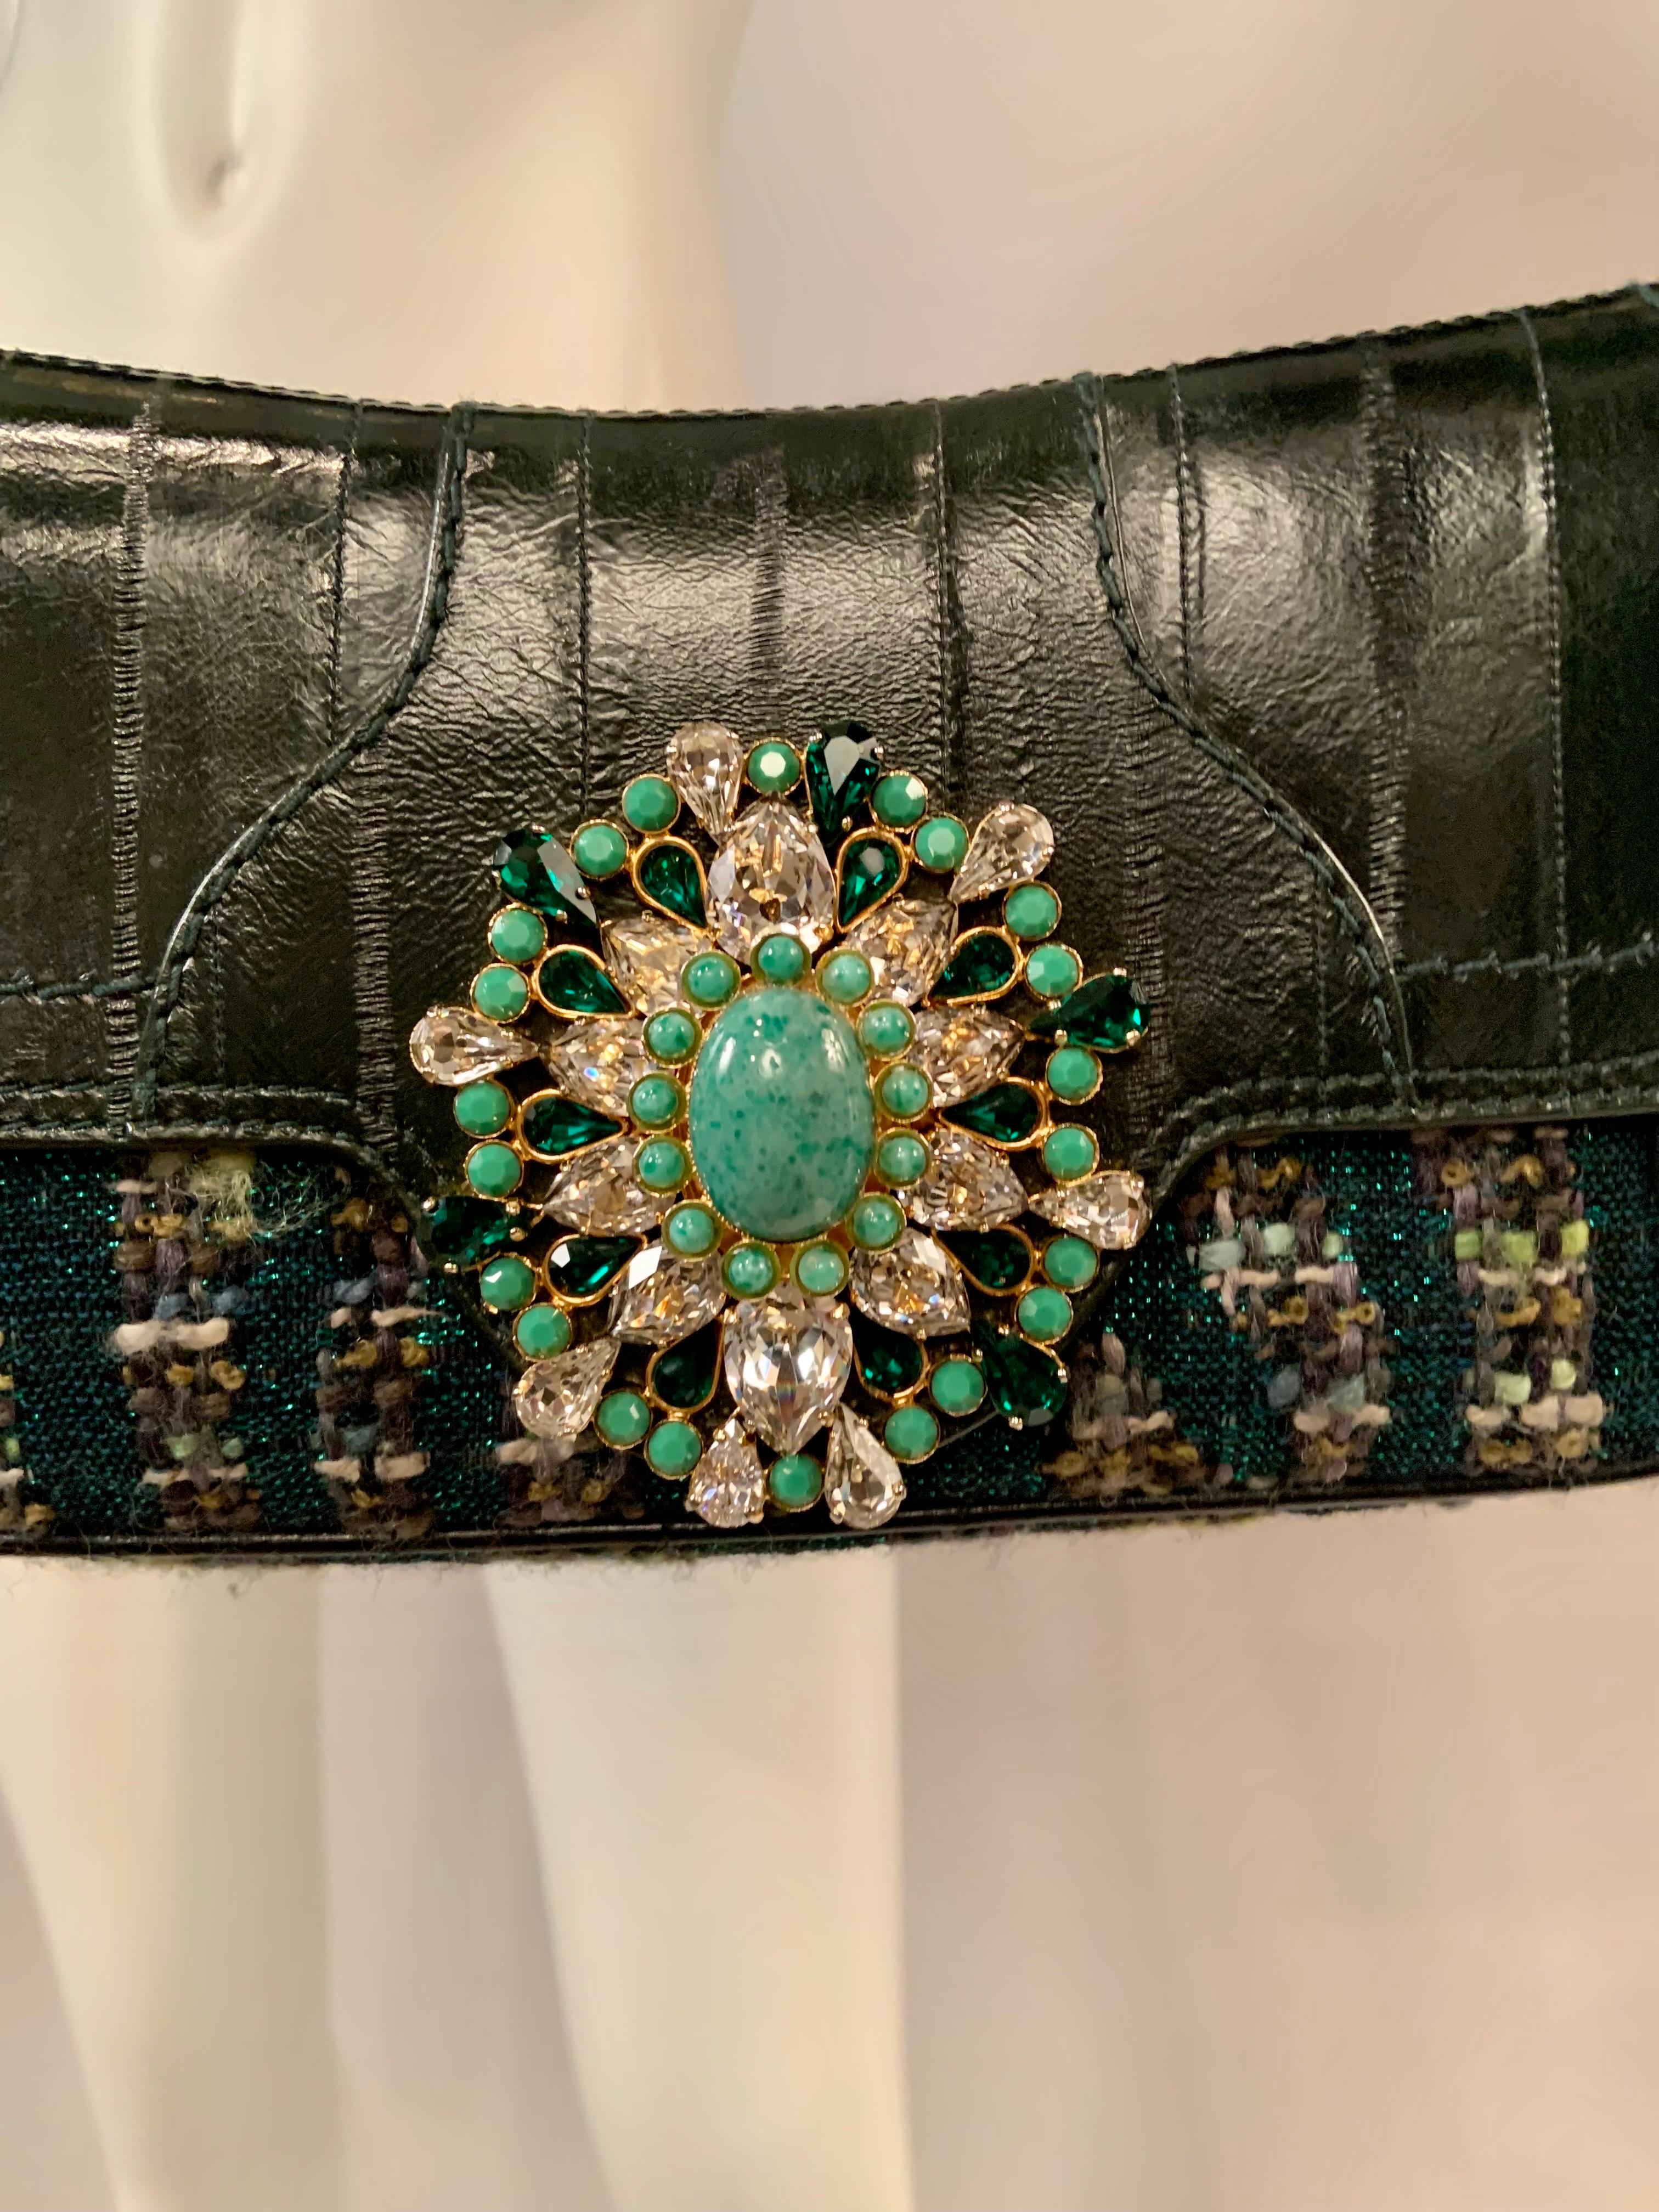 Women's Dolce & Gabbana Green Leather and Tweed Bag with Oversized Jewel Clasp For Sale